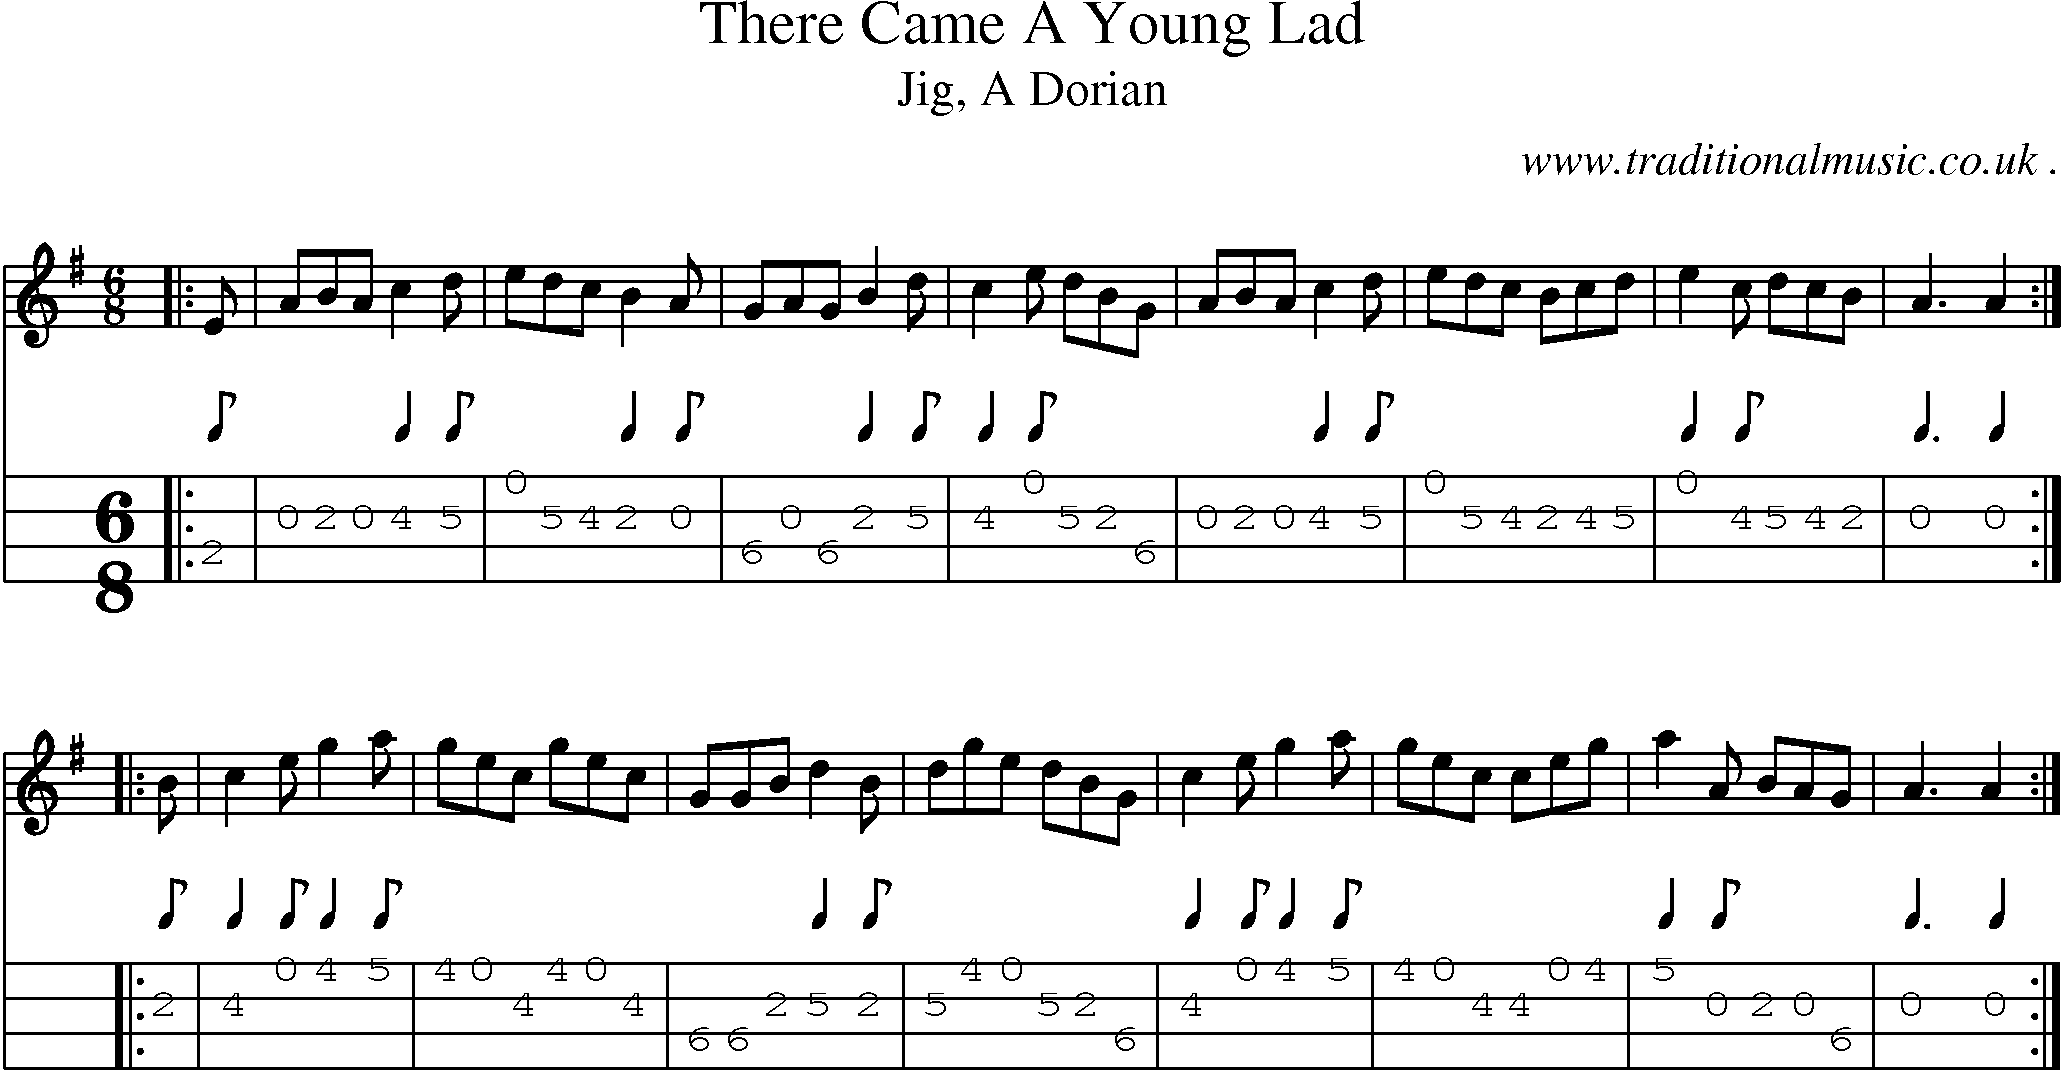 Sheet-music  score, Chords and Mandolin Tabs for There Came A Young Lad